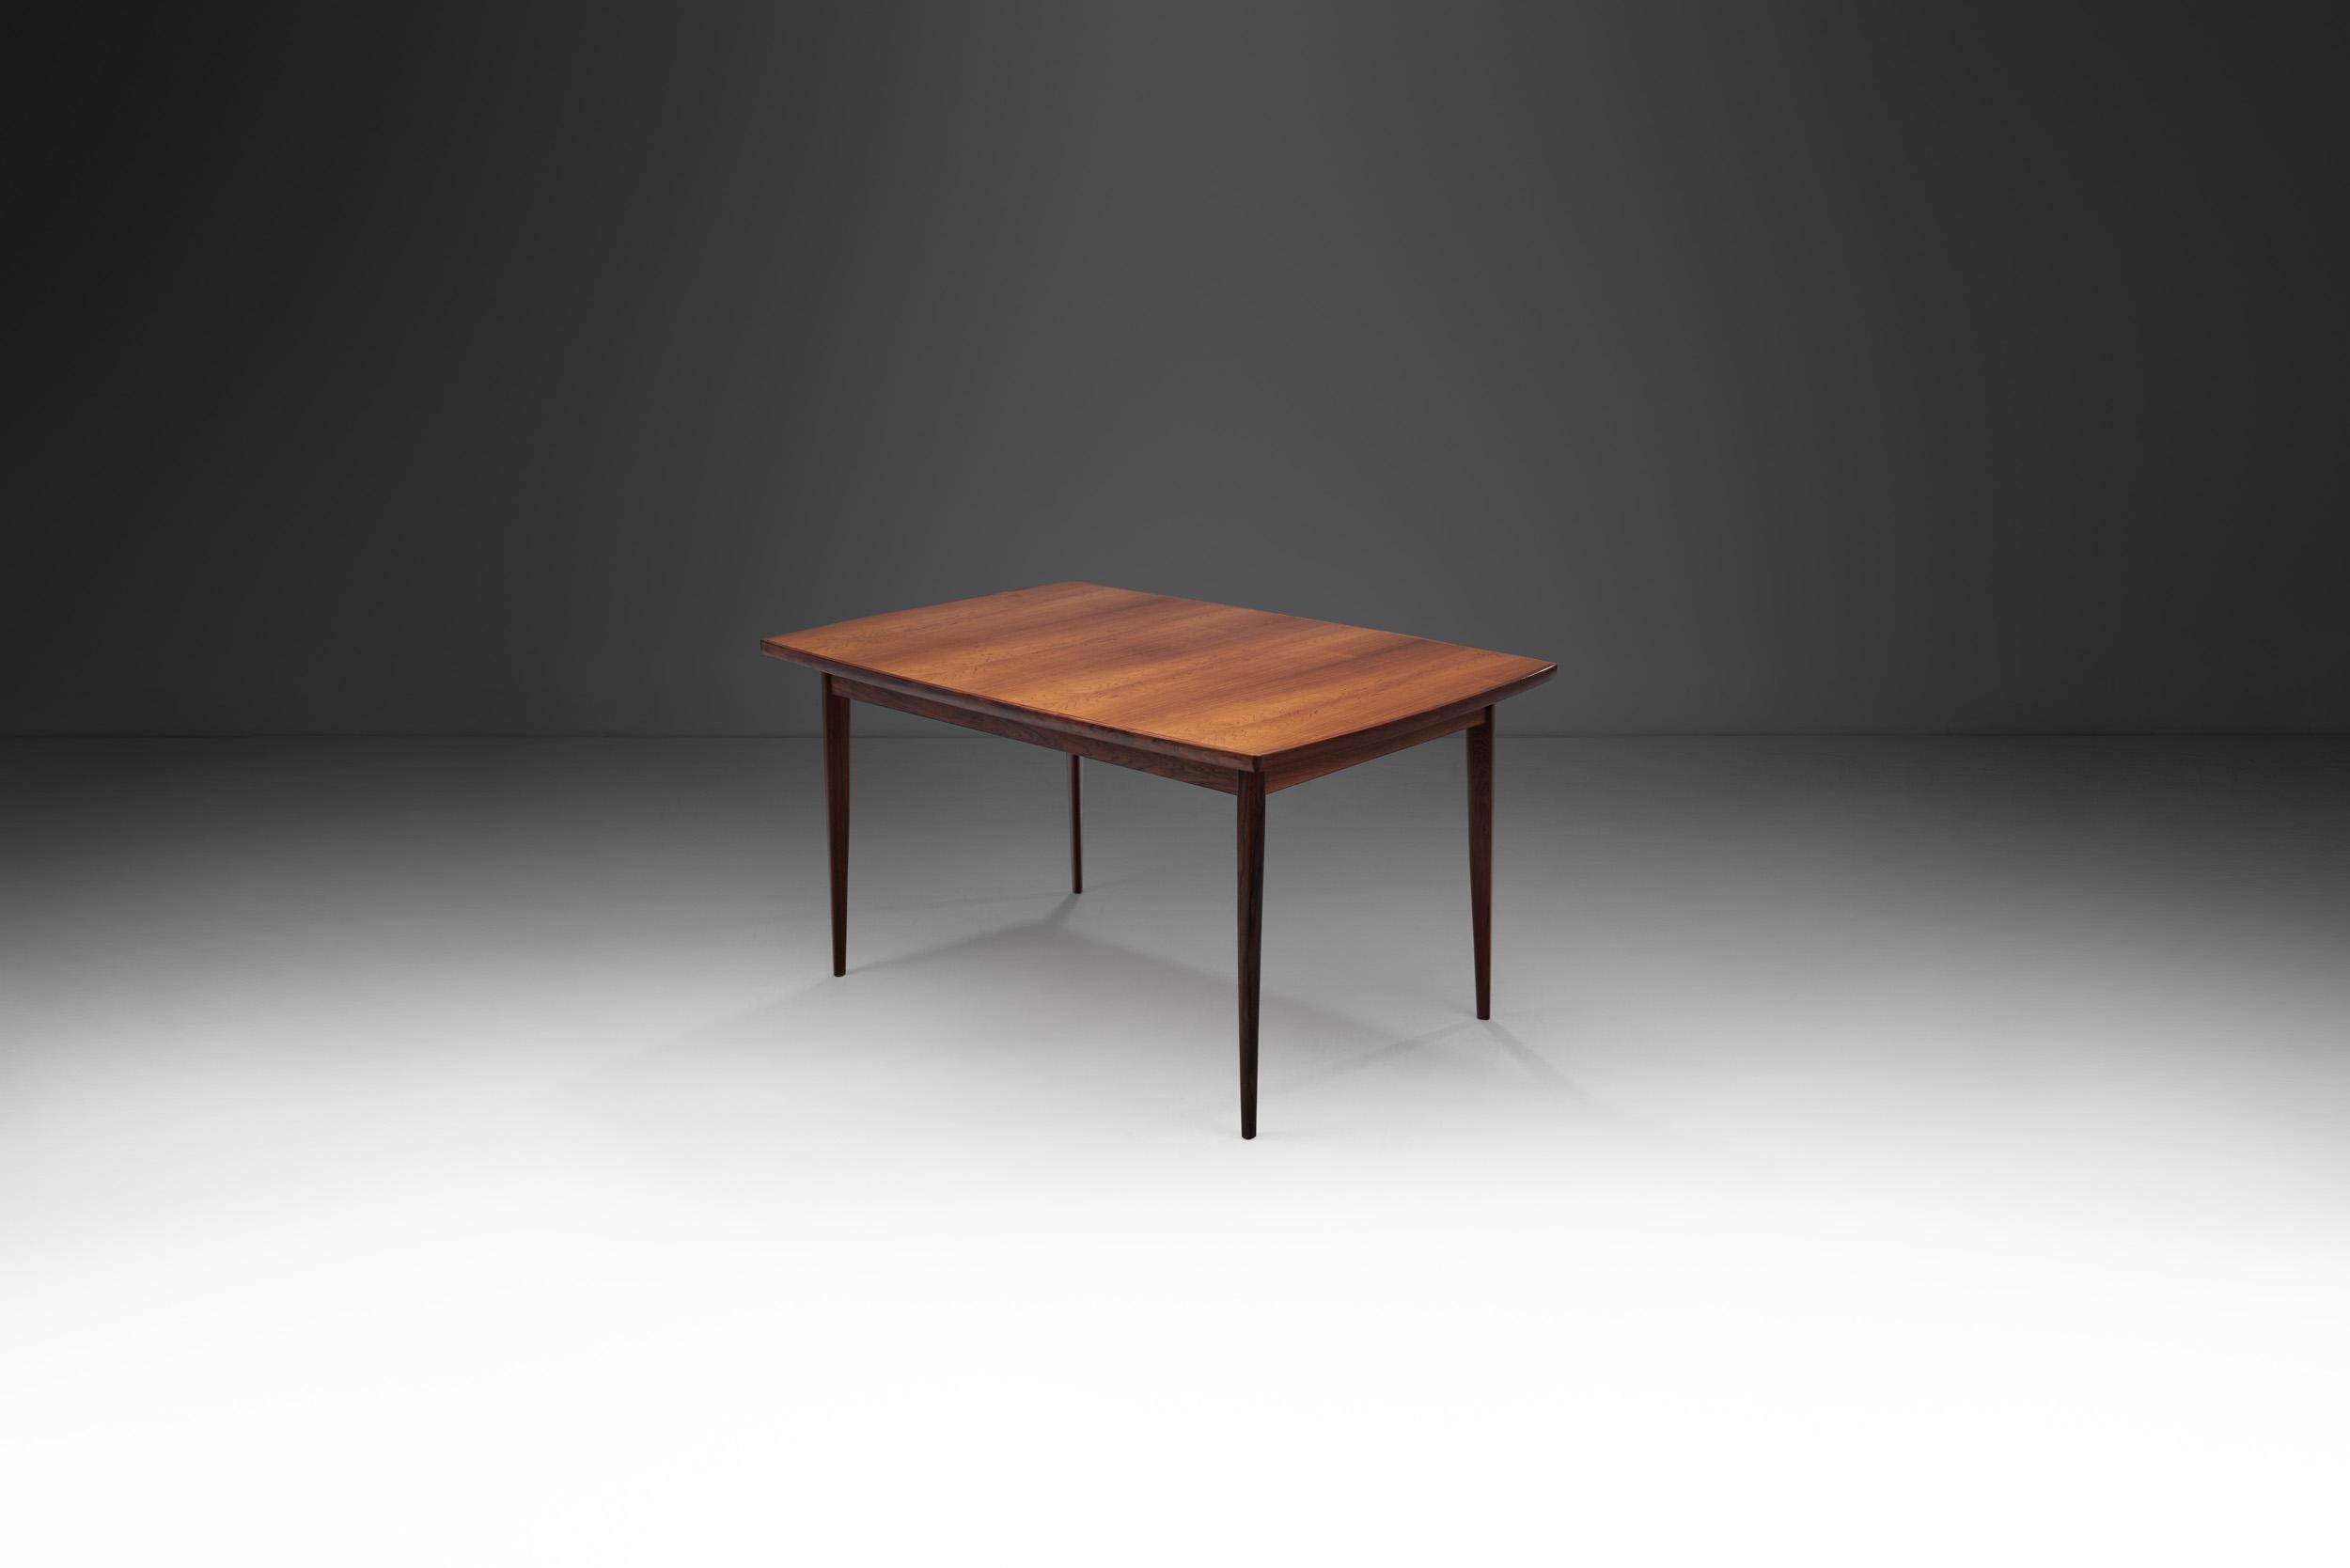 This gorgeous extendable dining table model by the Danish furniture maker, Bernhard Pedersen og Søn was inspired by classic Danish furniture design and simplicity. The period between 1950 and 1970 in particular was characterized by some of the most